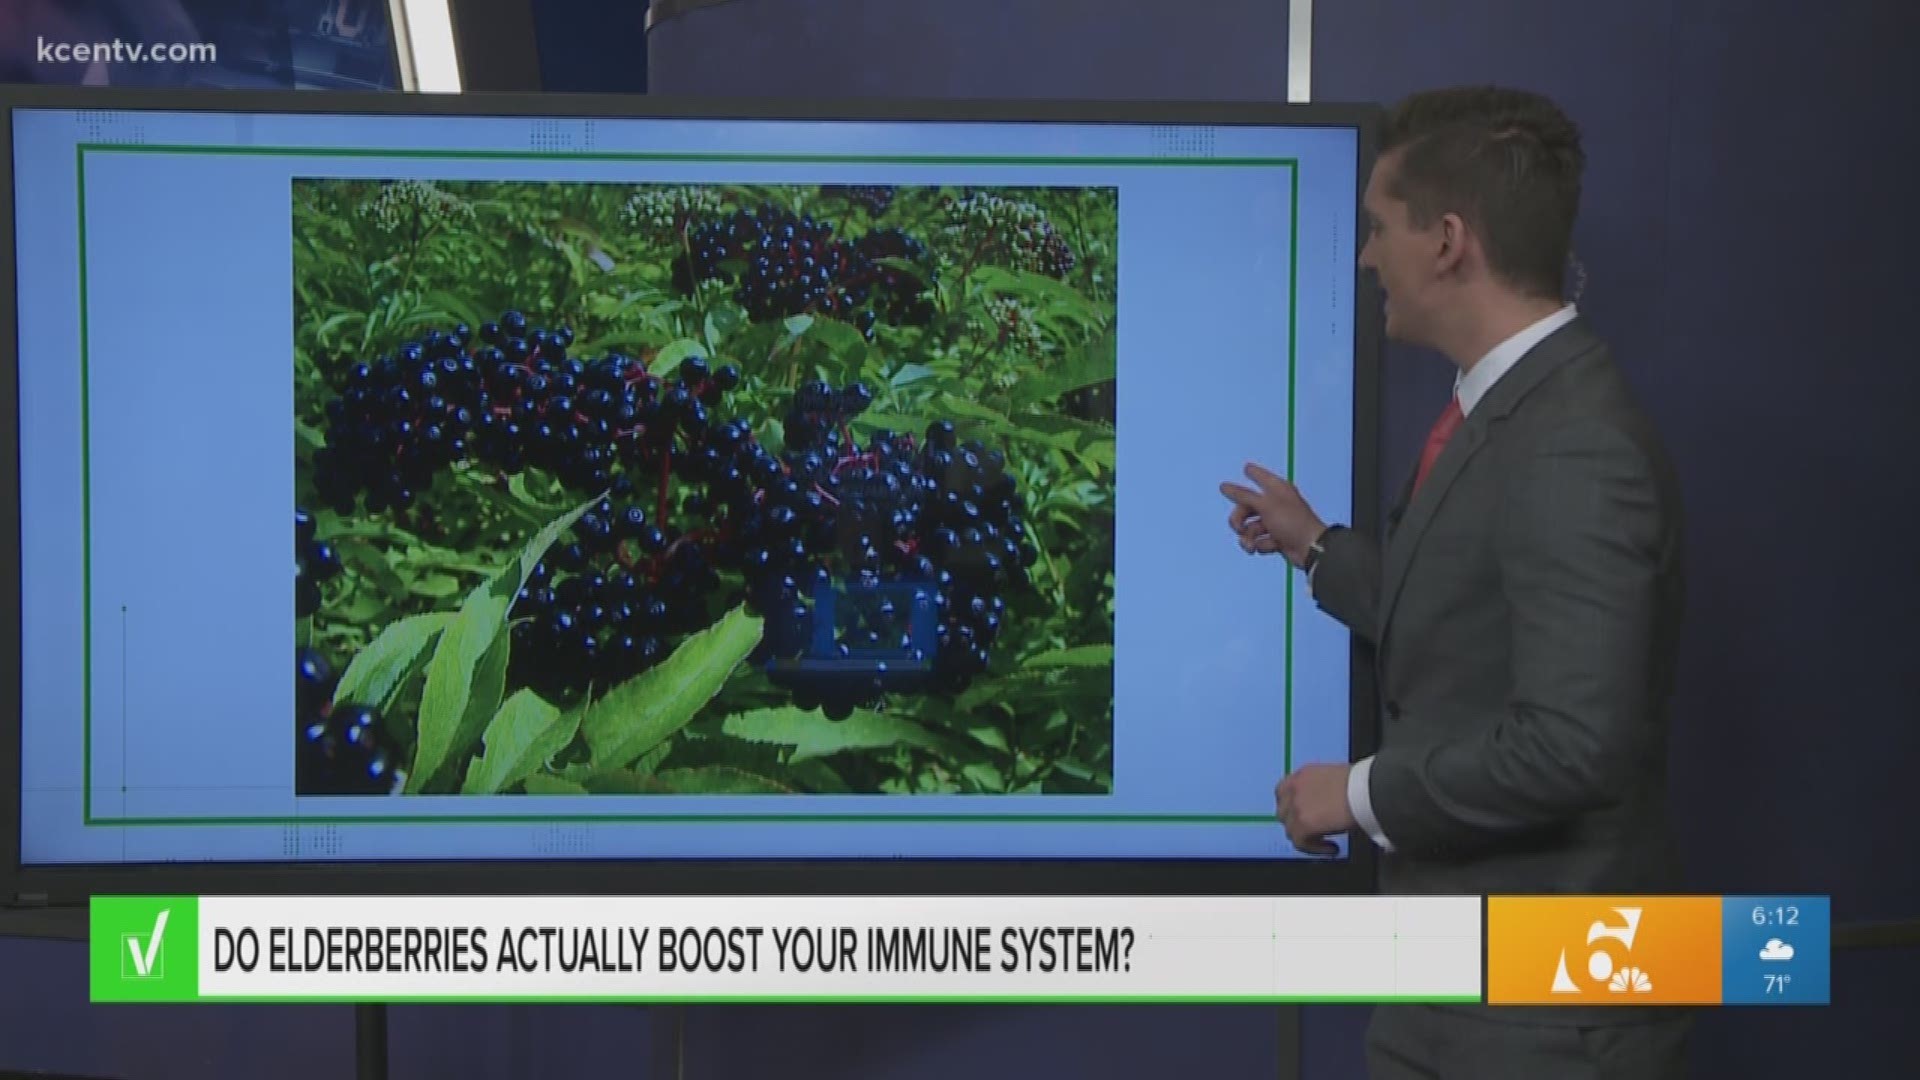 During flu season, you may want to know what remedies keep you from feeling under the weather. Chris Rogers learned more about elderberries to verify if they boost your immune system.